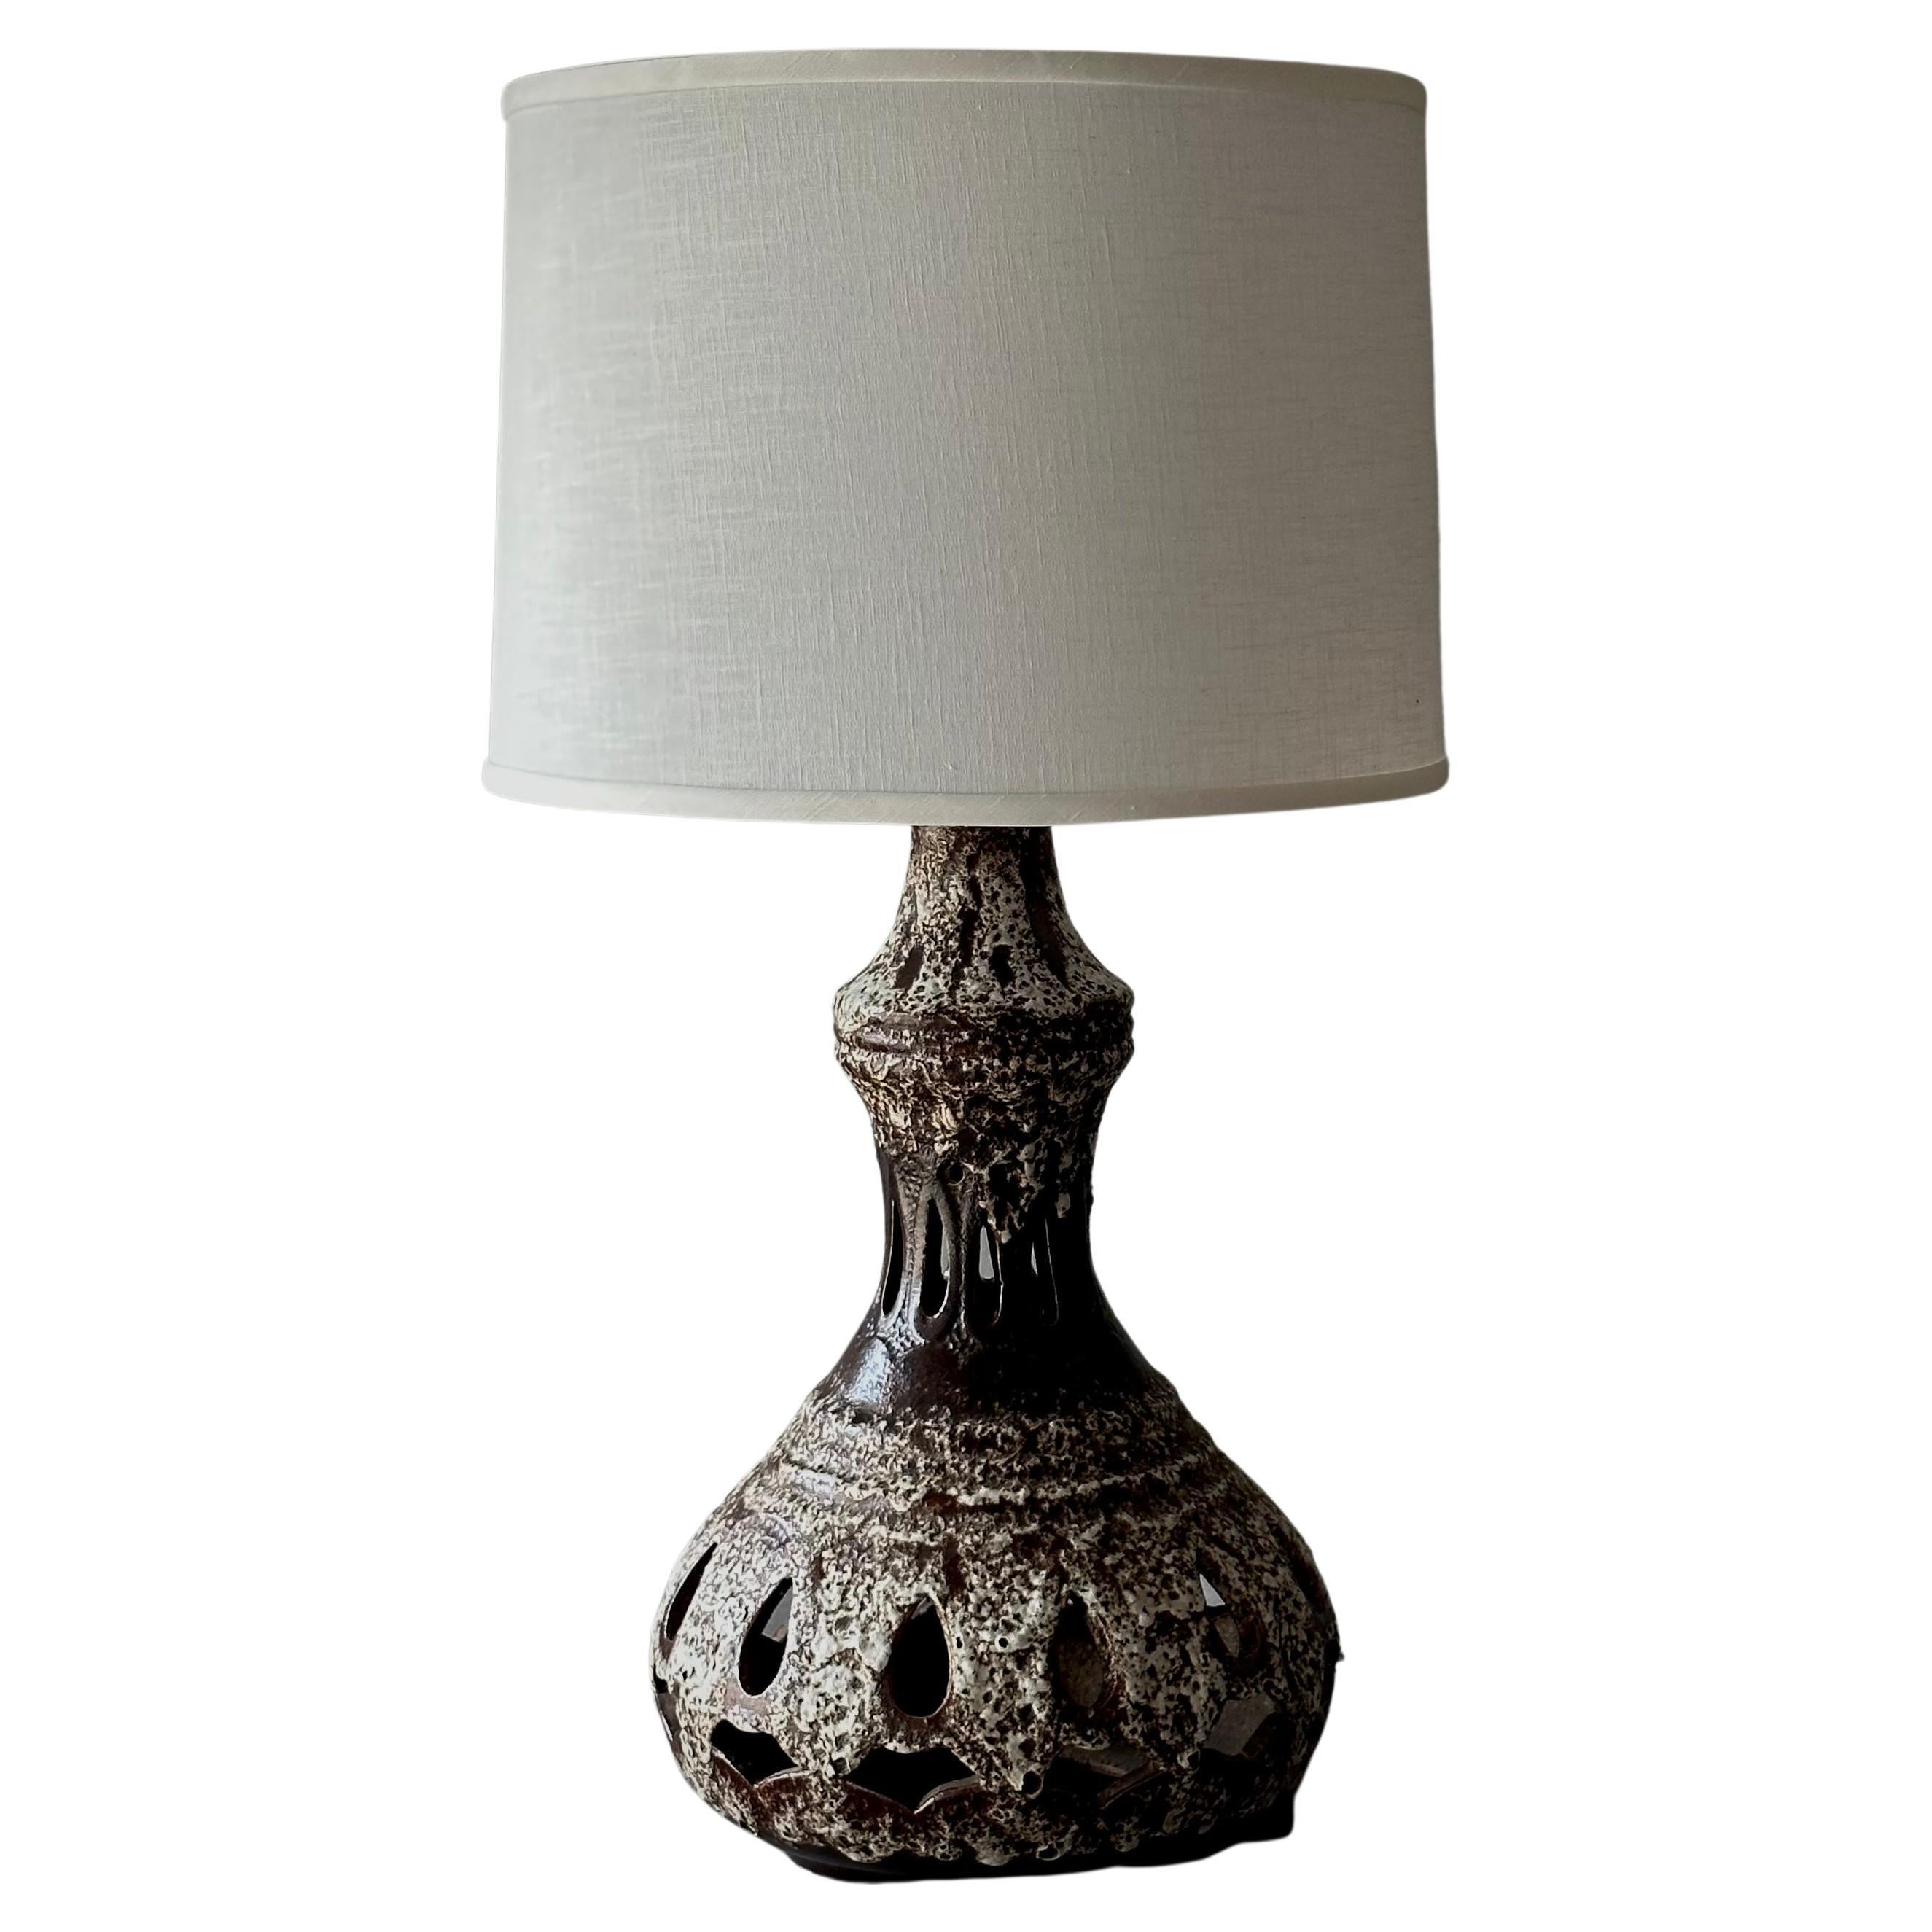 1970s West German ceramic table lamp with white and dark brown glazing, perforated curvilinear shape and unique seafoam-like textured surface. Includes custom ivory linen shade. 

Germany, circa 1970

Dimensions: 17W x 17D x 32H.